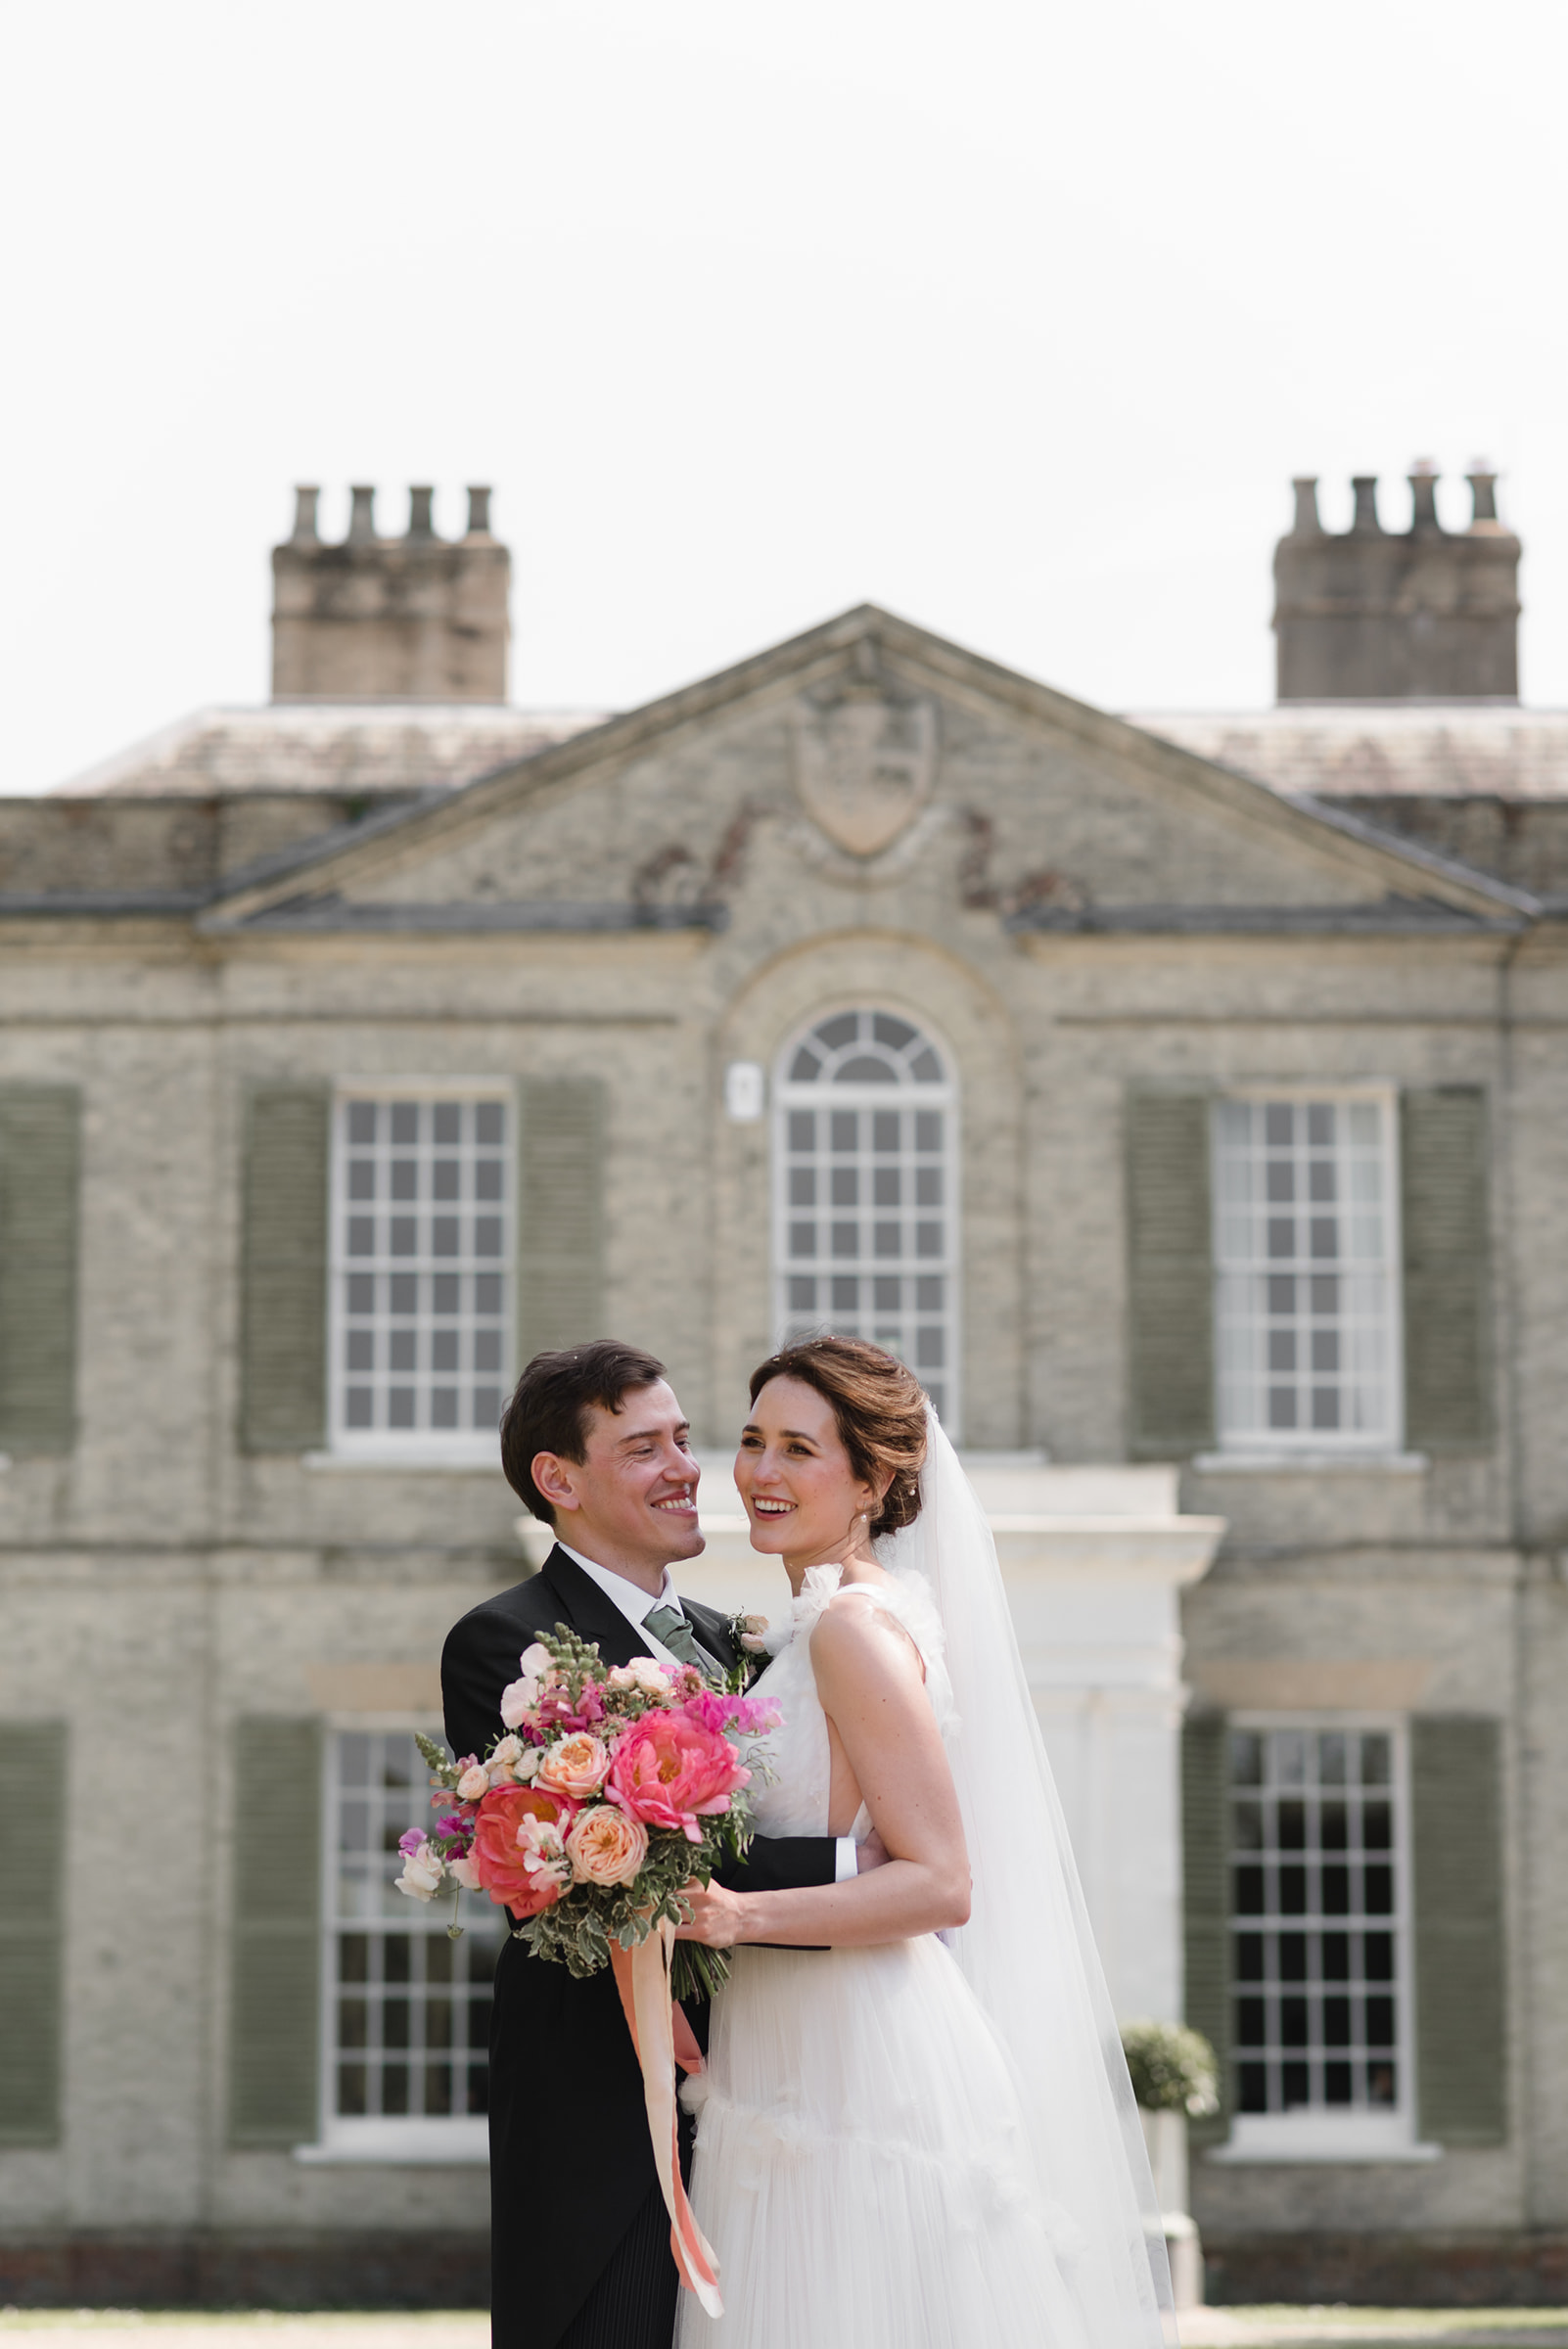  A manor house wedding in Spring